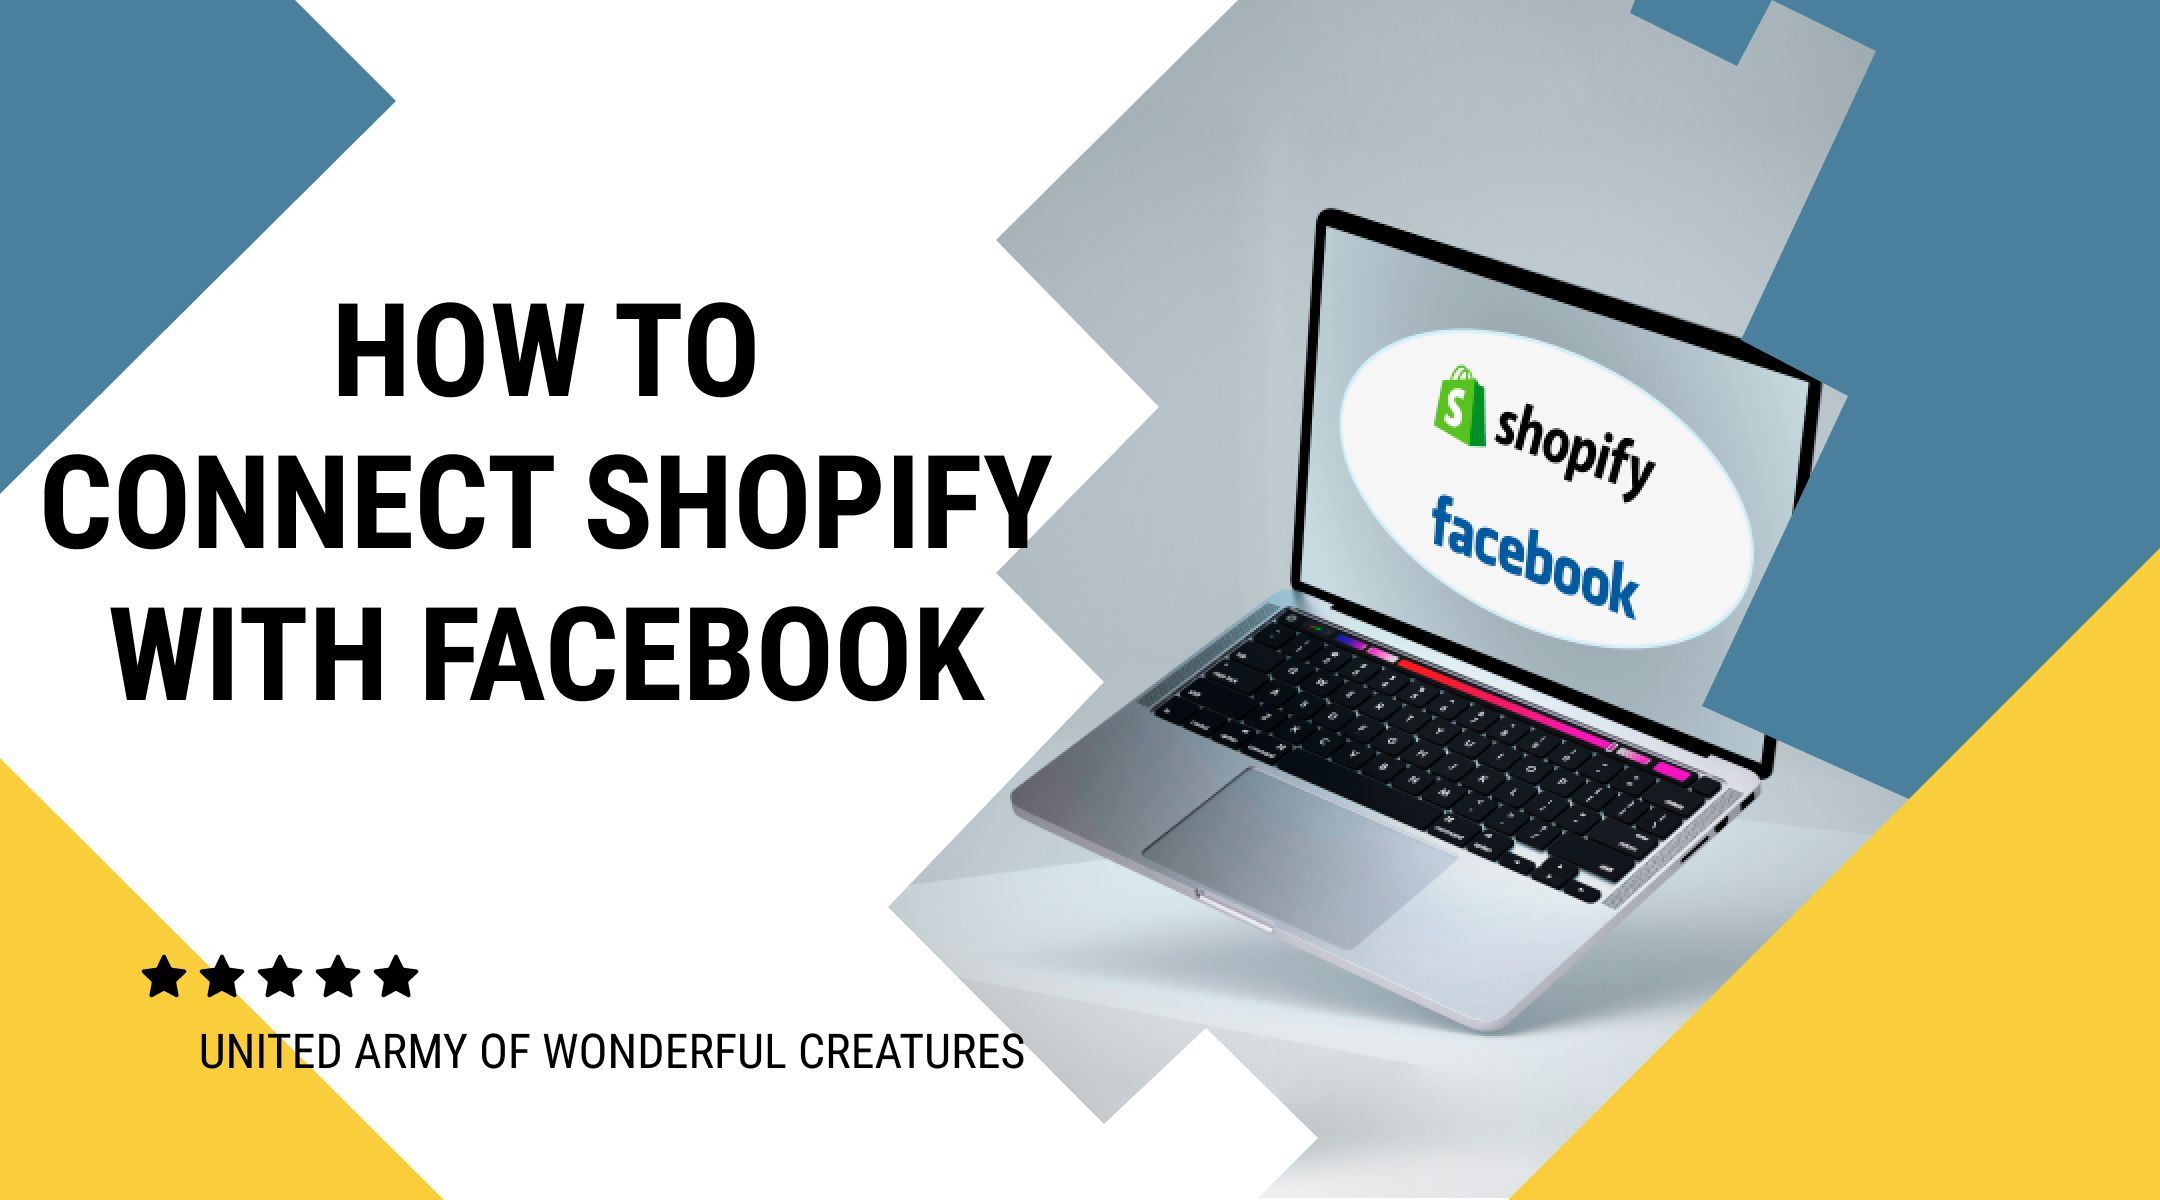 Shopify & Facebook integration: Step-by-Step Guide